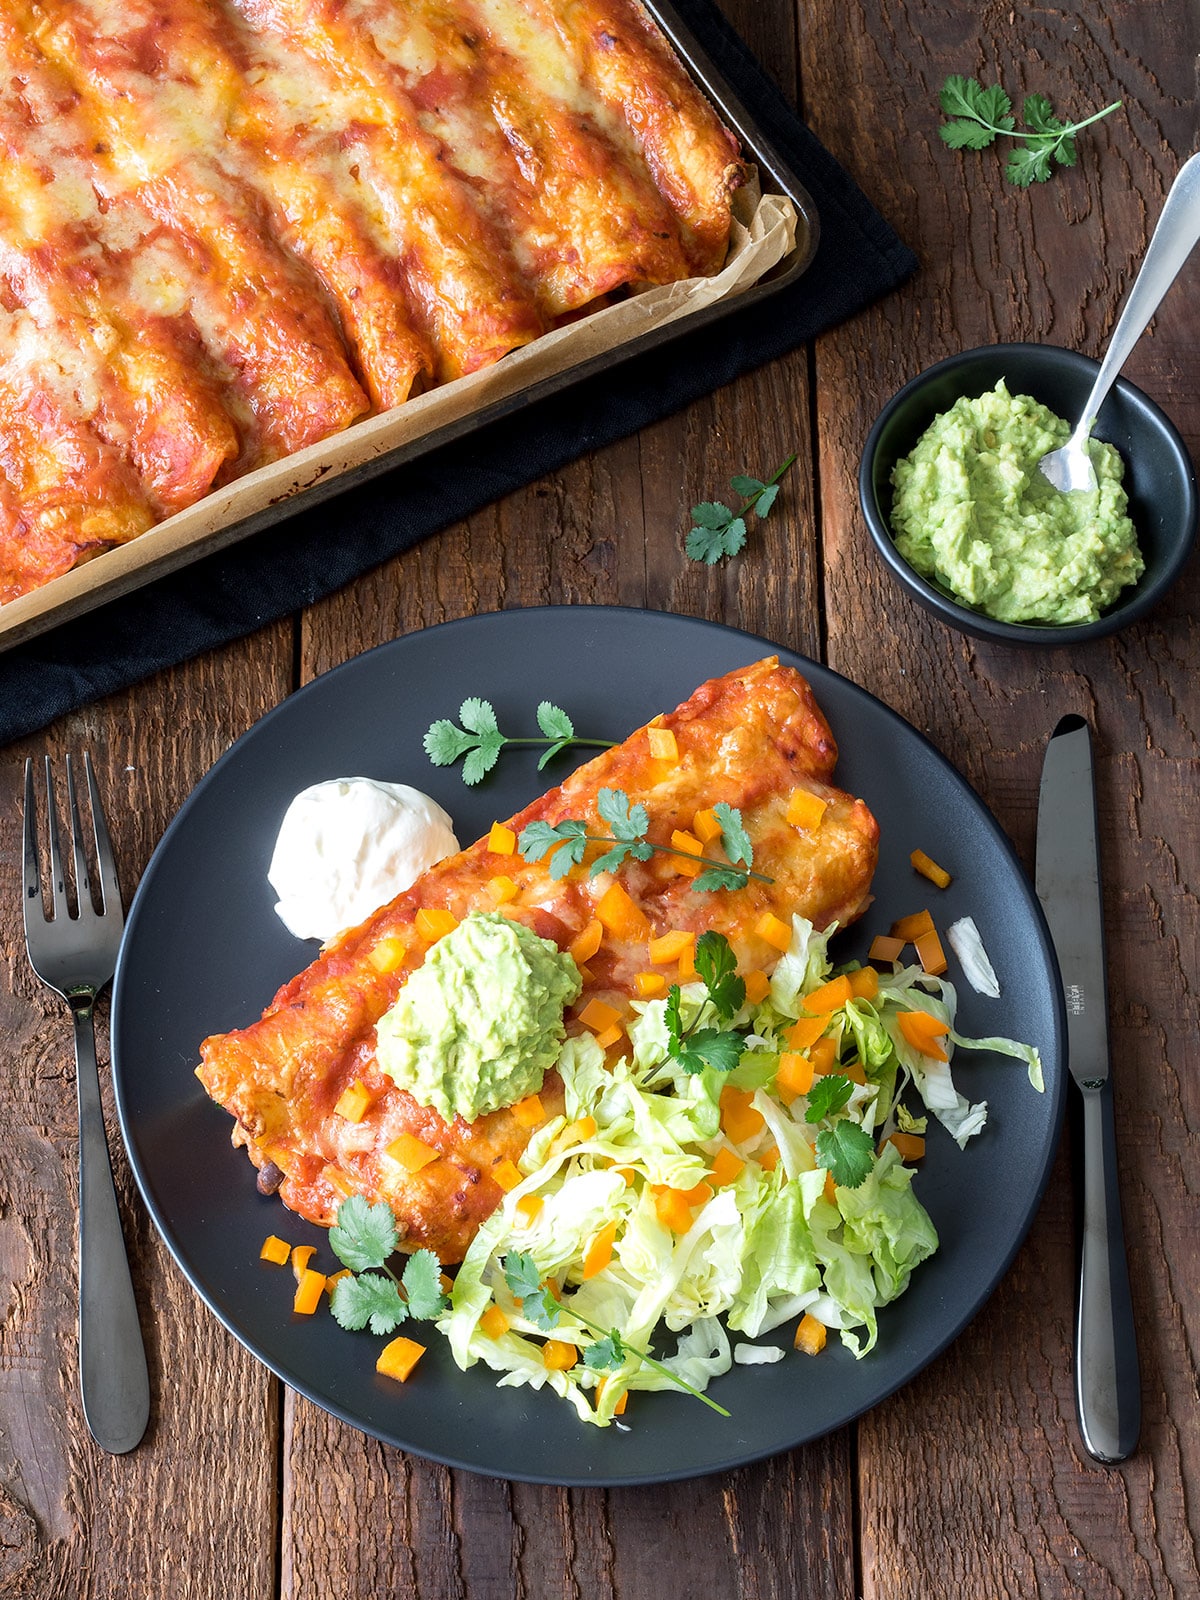 Chicken enchiladas are an easy family-friendly meal that’s sure to go down a treat. The homemade enchilada sauce adds an extra level of deliciousness.